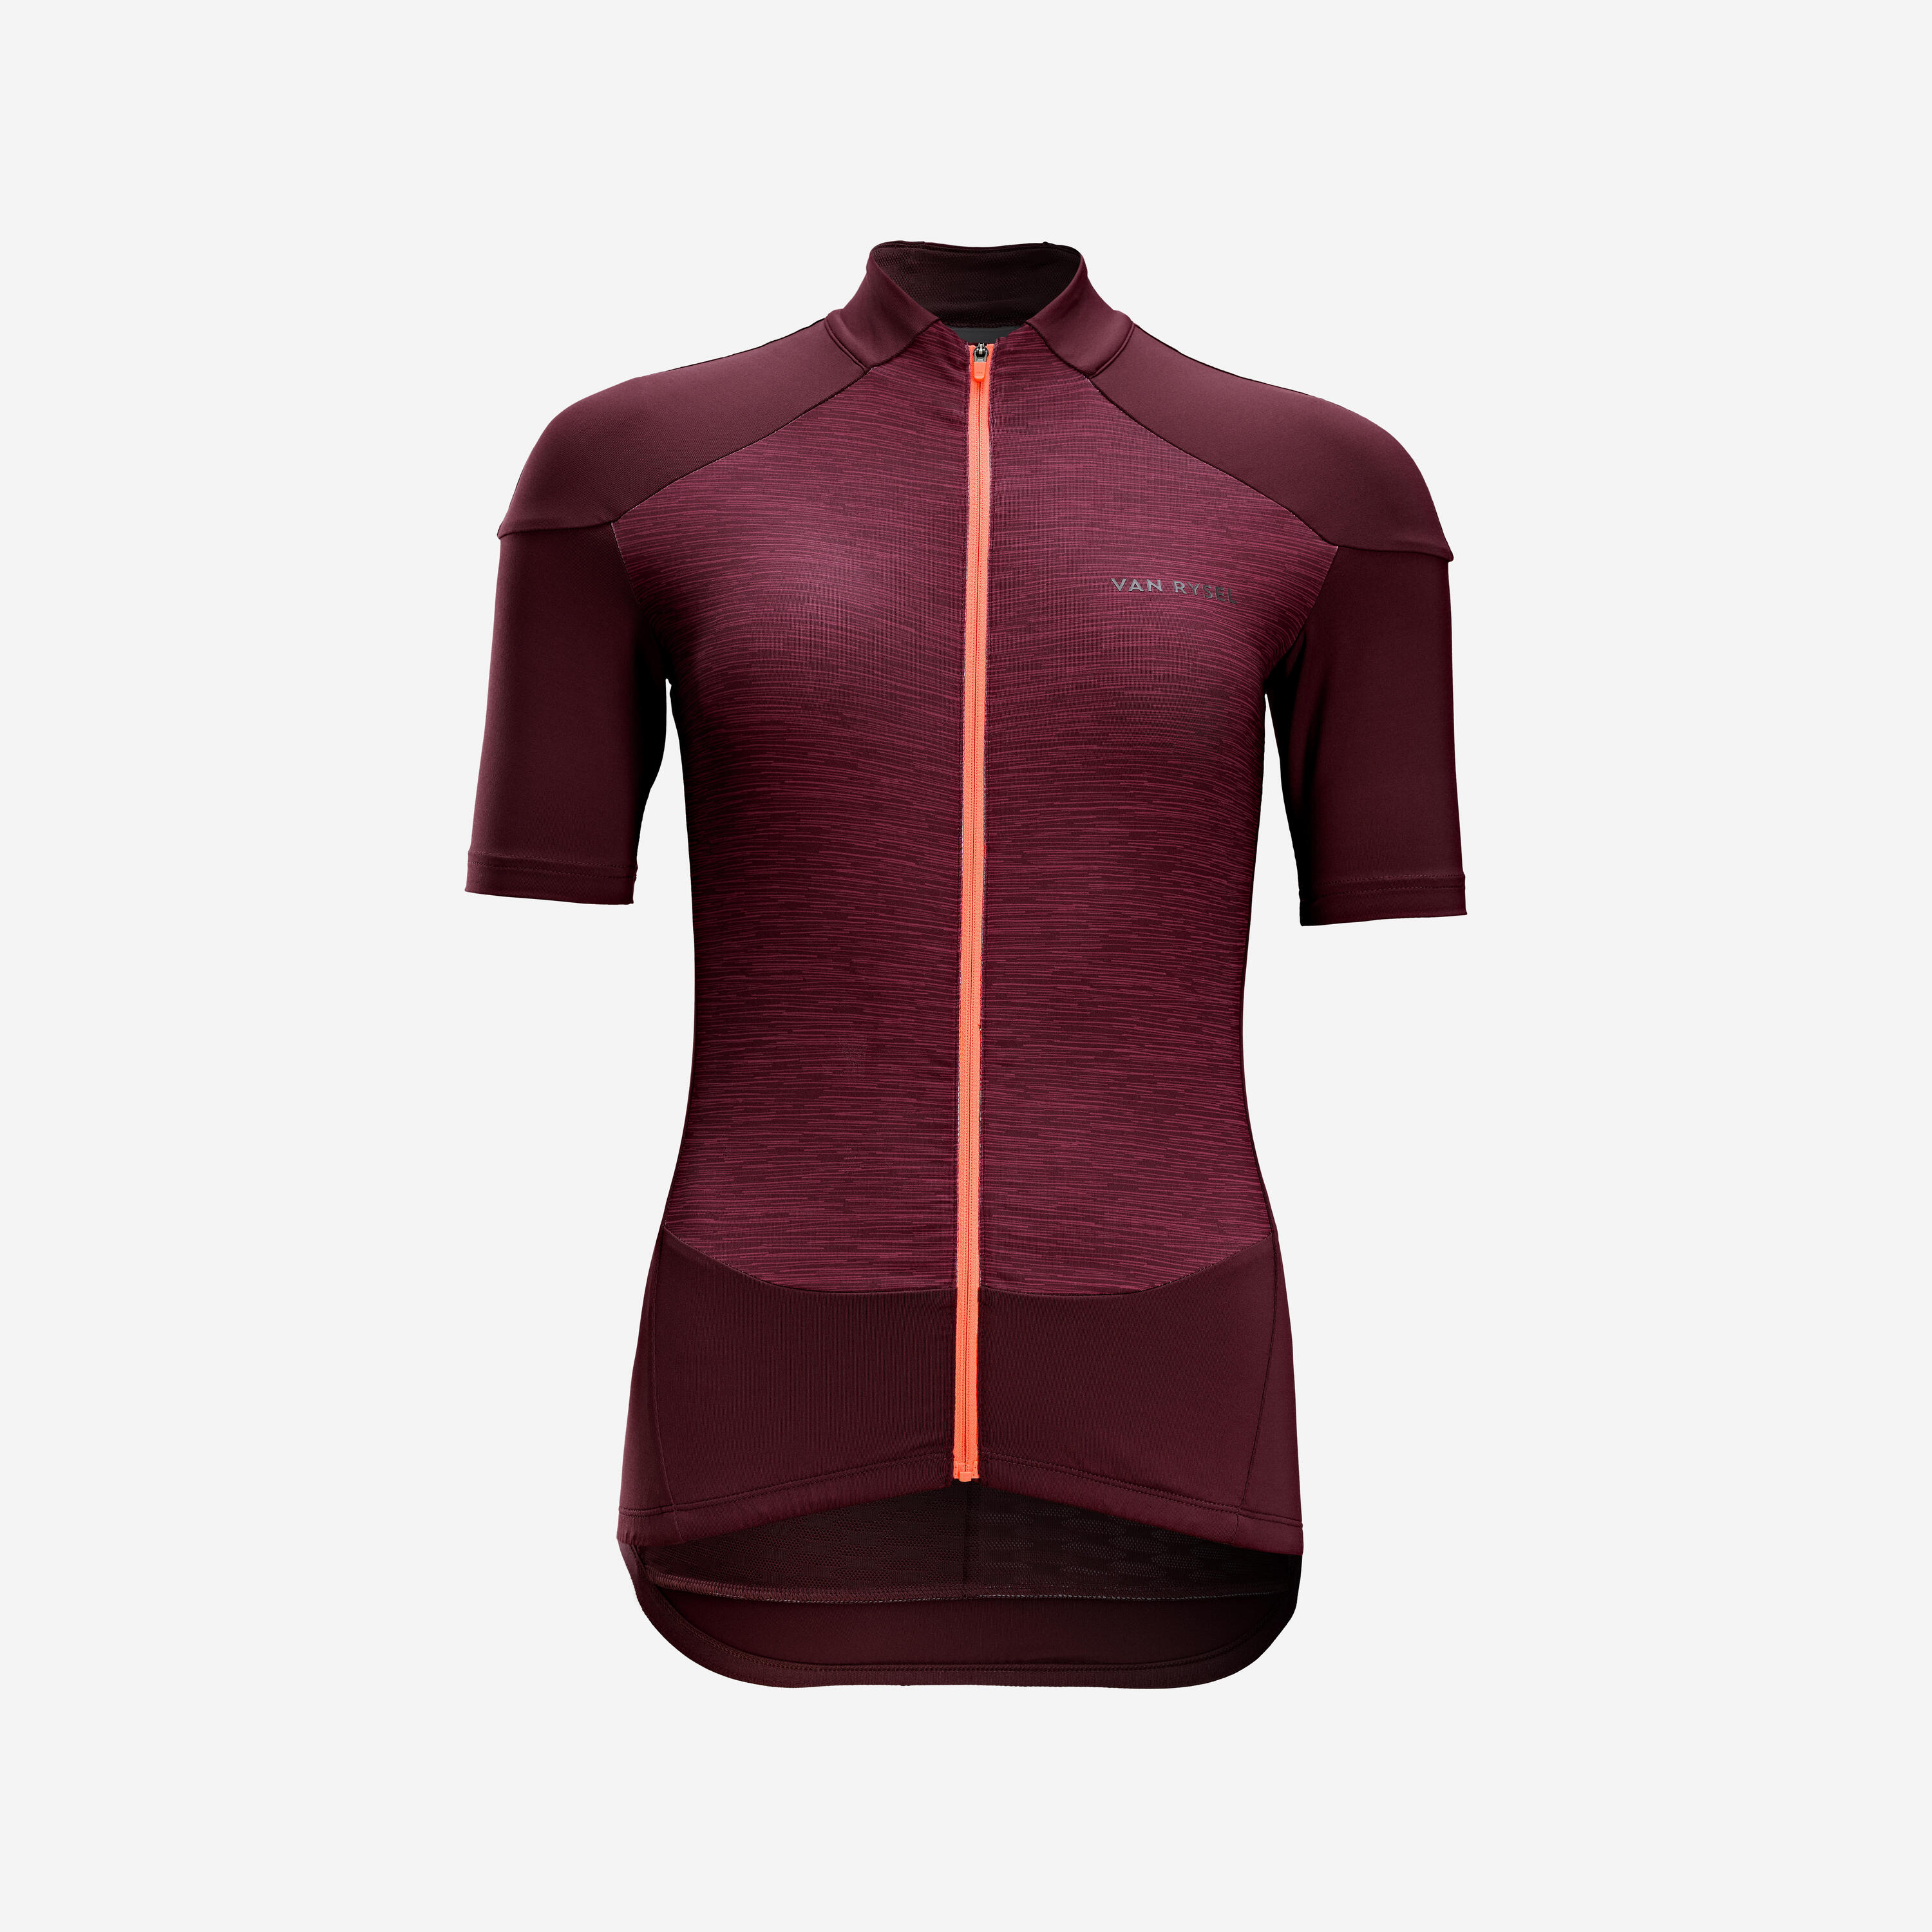 Women's Short-Sleeved Road Cycling Jersey 500 - Burgundy 1/7